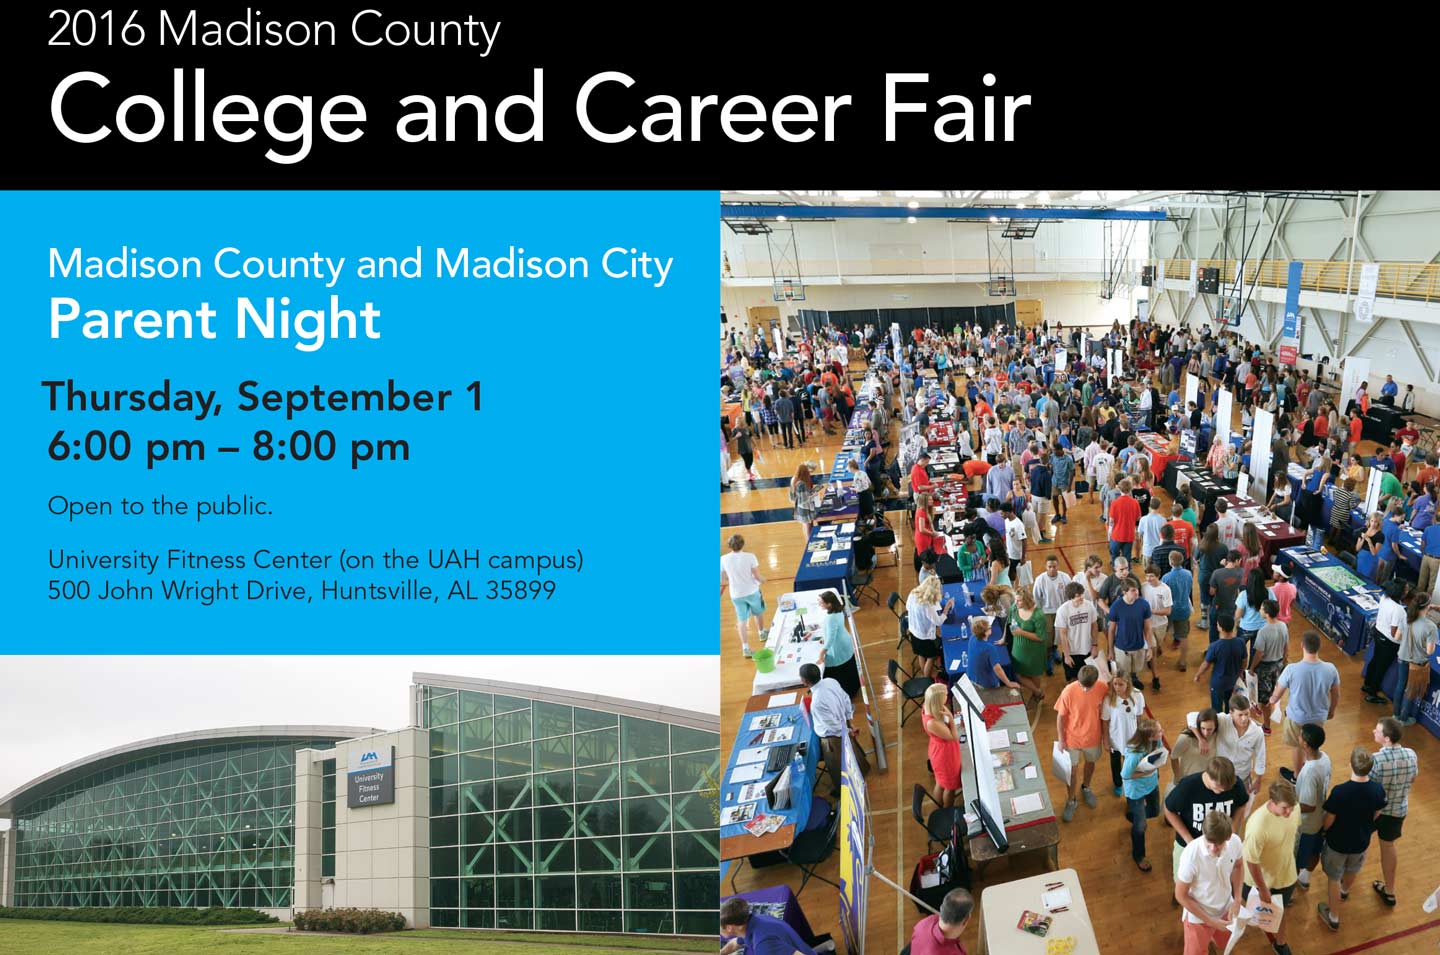 2016 Madison County College and Career Fair. Madison County and Madison City Parent Night. Thursday, September 1 6 pm to 8 pm.  Open to the public. University Fitness Center (on the UAH campus) 500 John Wright Drive, Huntsville, Al. 35899